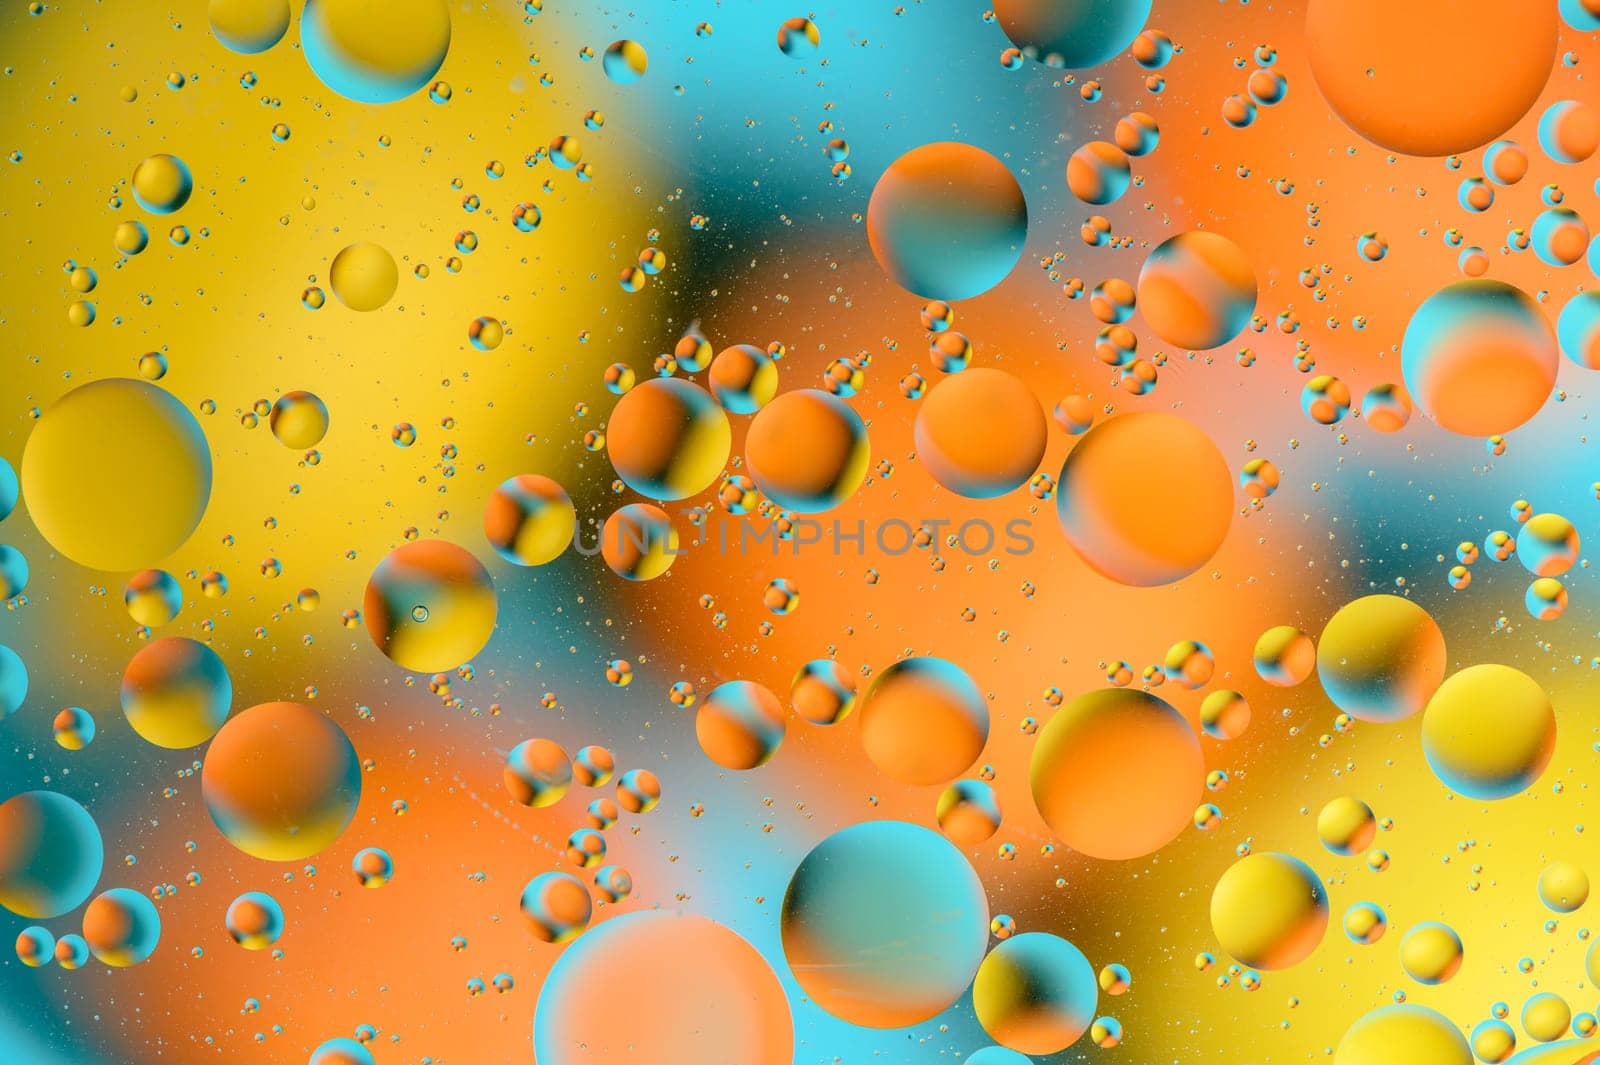 blue and orange spots with multi-colored circles similar to the galaxy and microcosm 7 by Mixa74